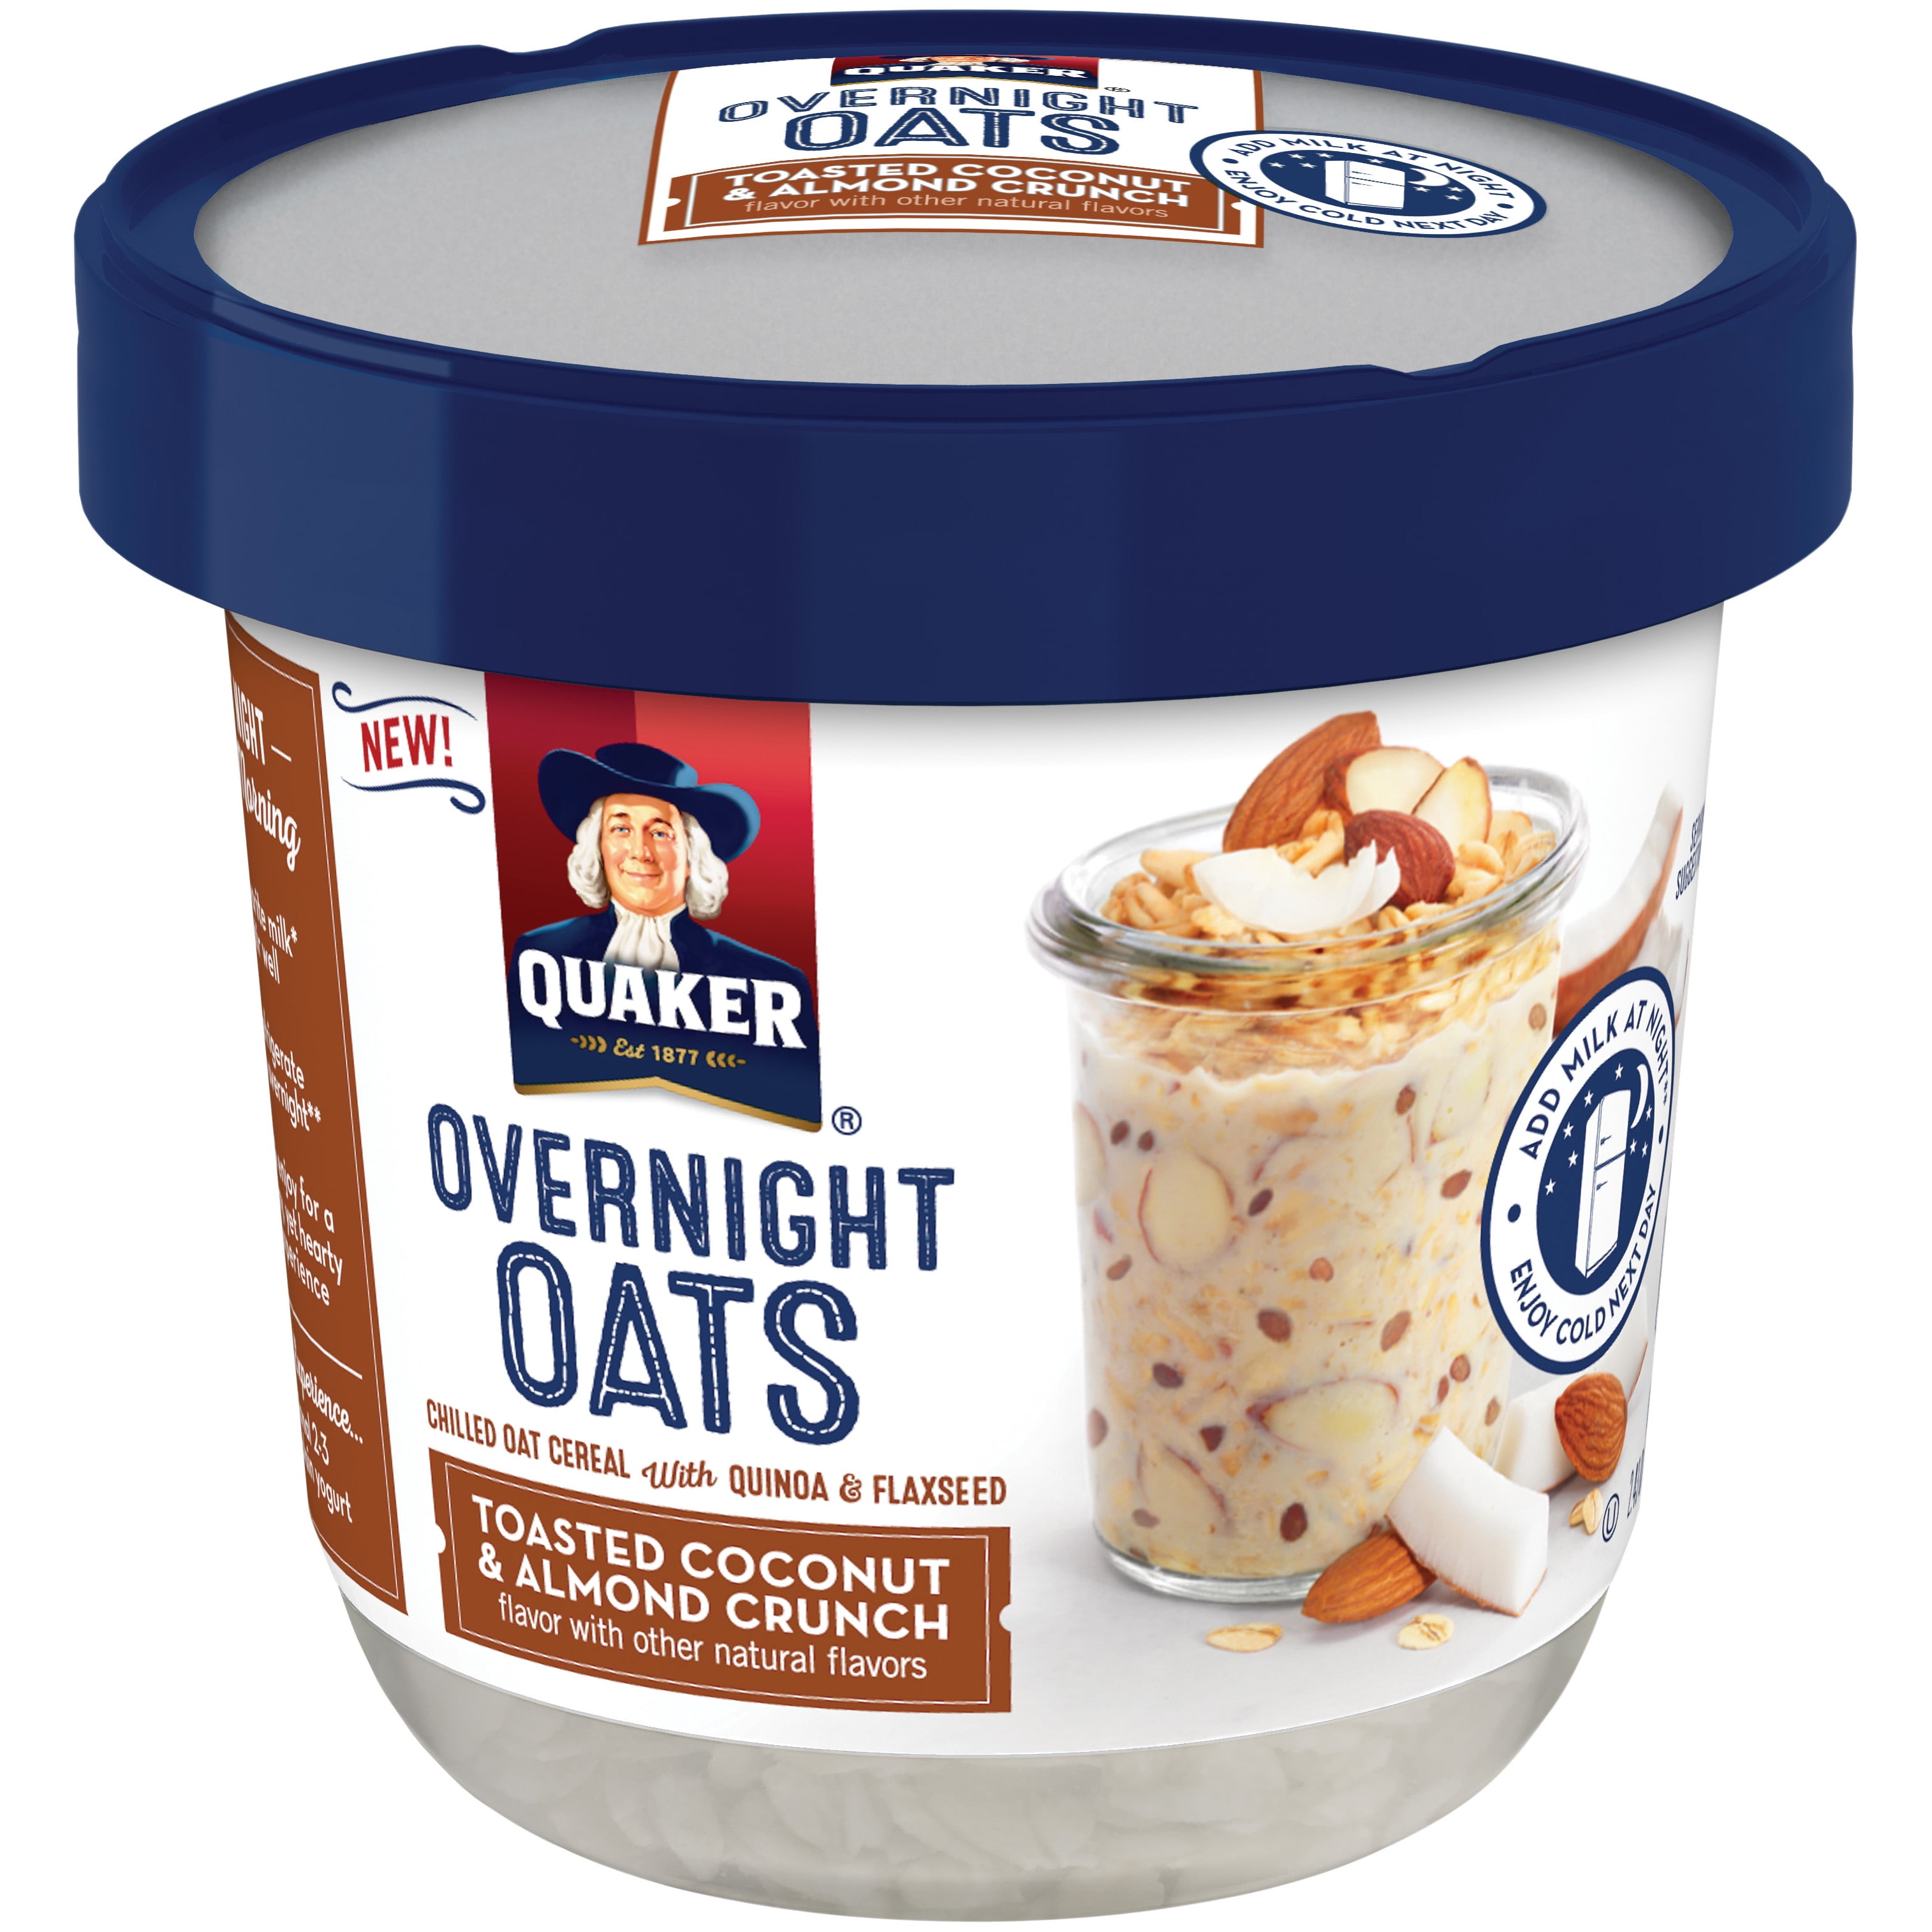 Quaker Overnight Oats Toasted Coconut & Almond Crunch, 2.43 OZ